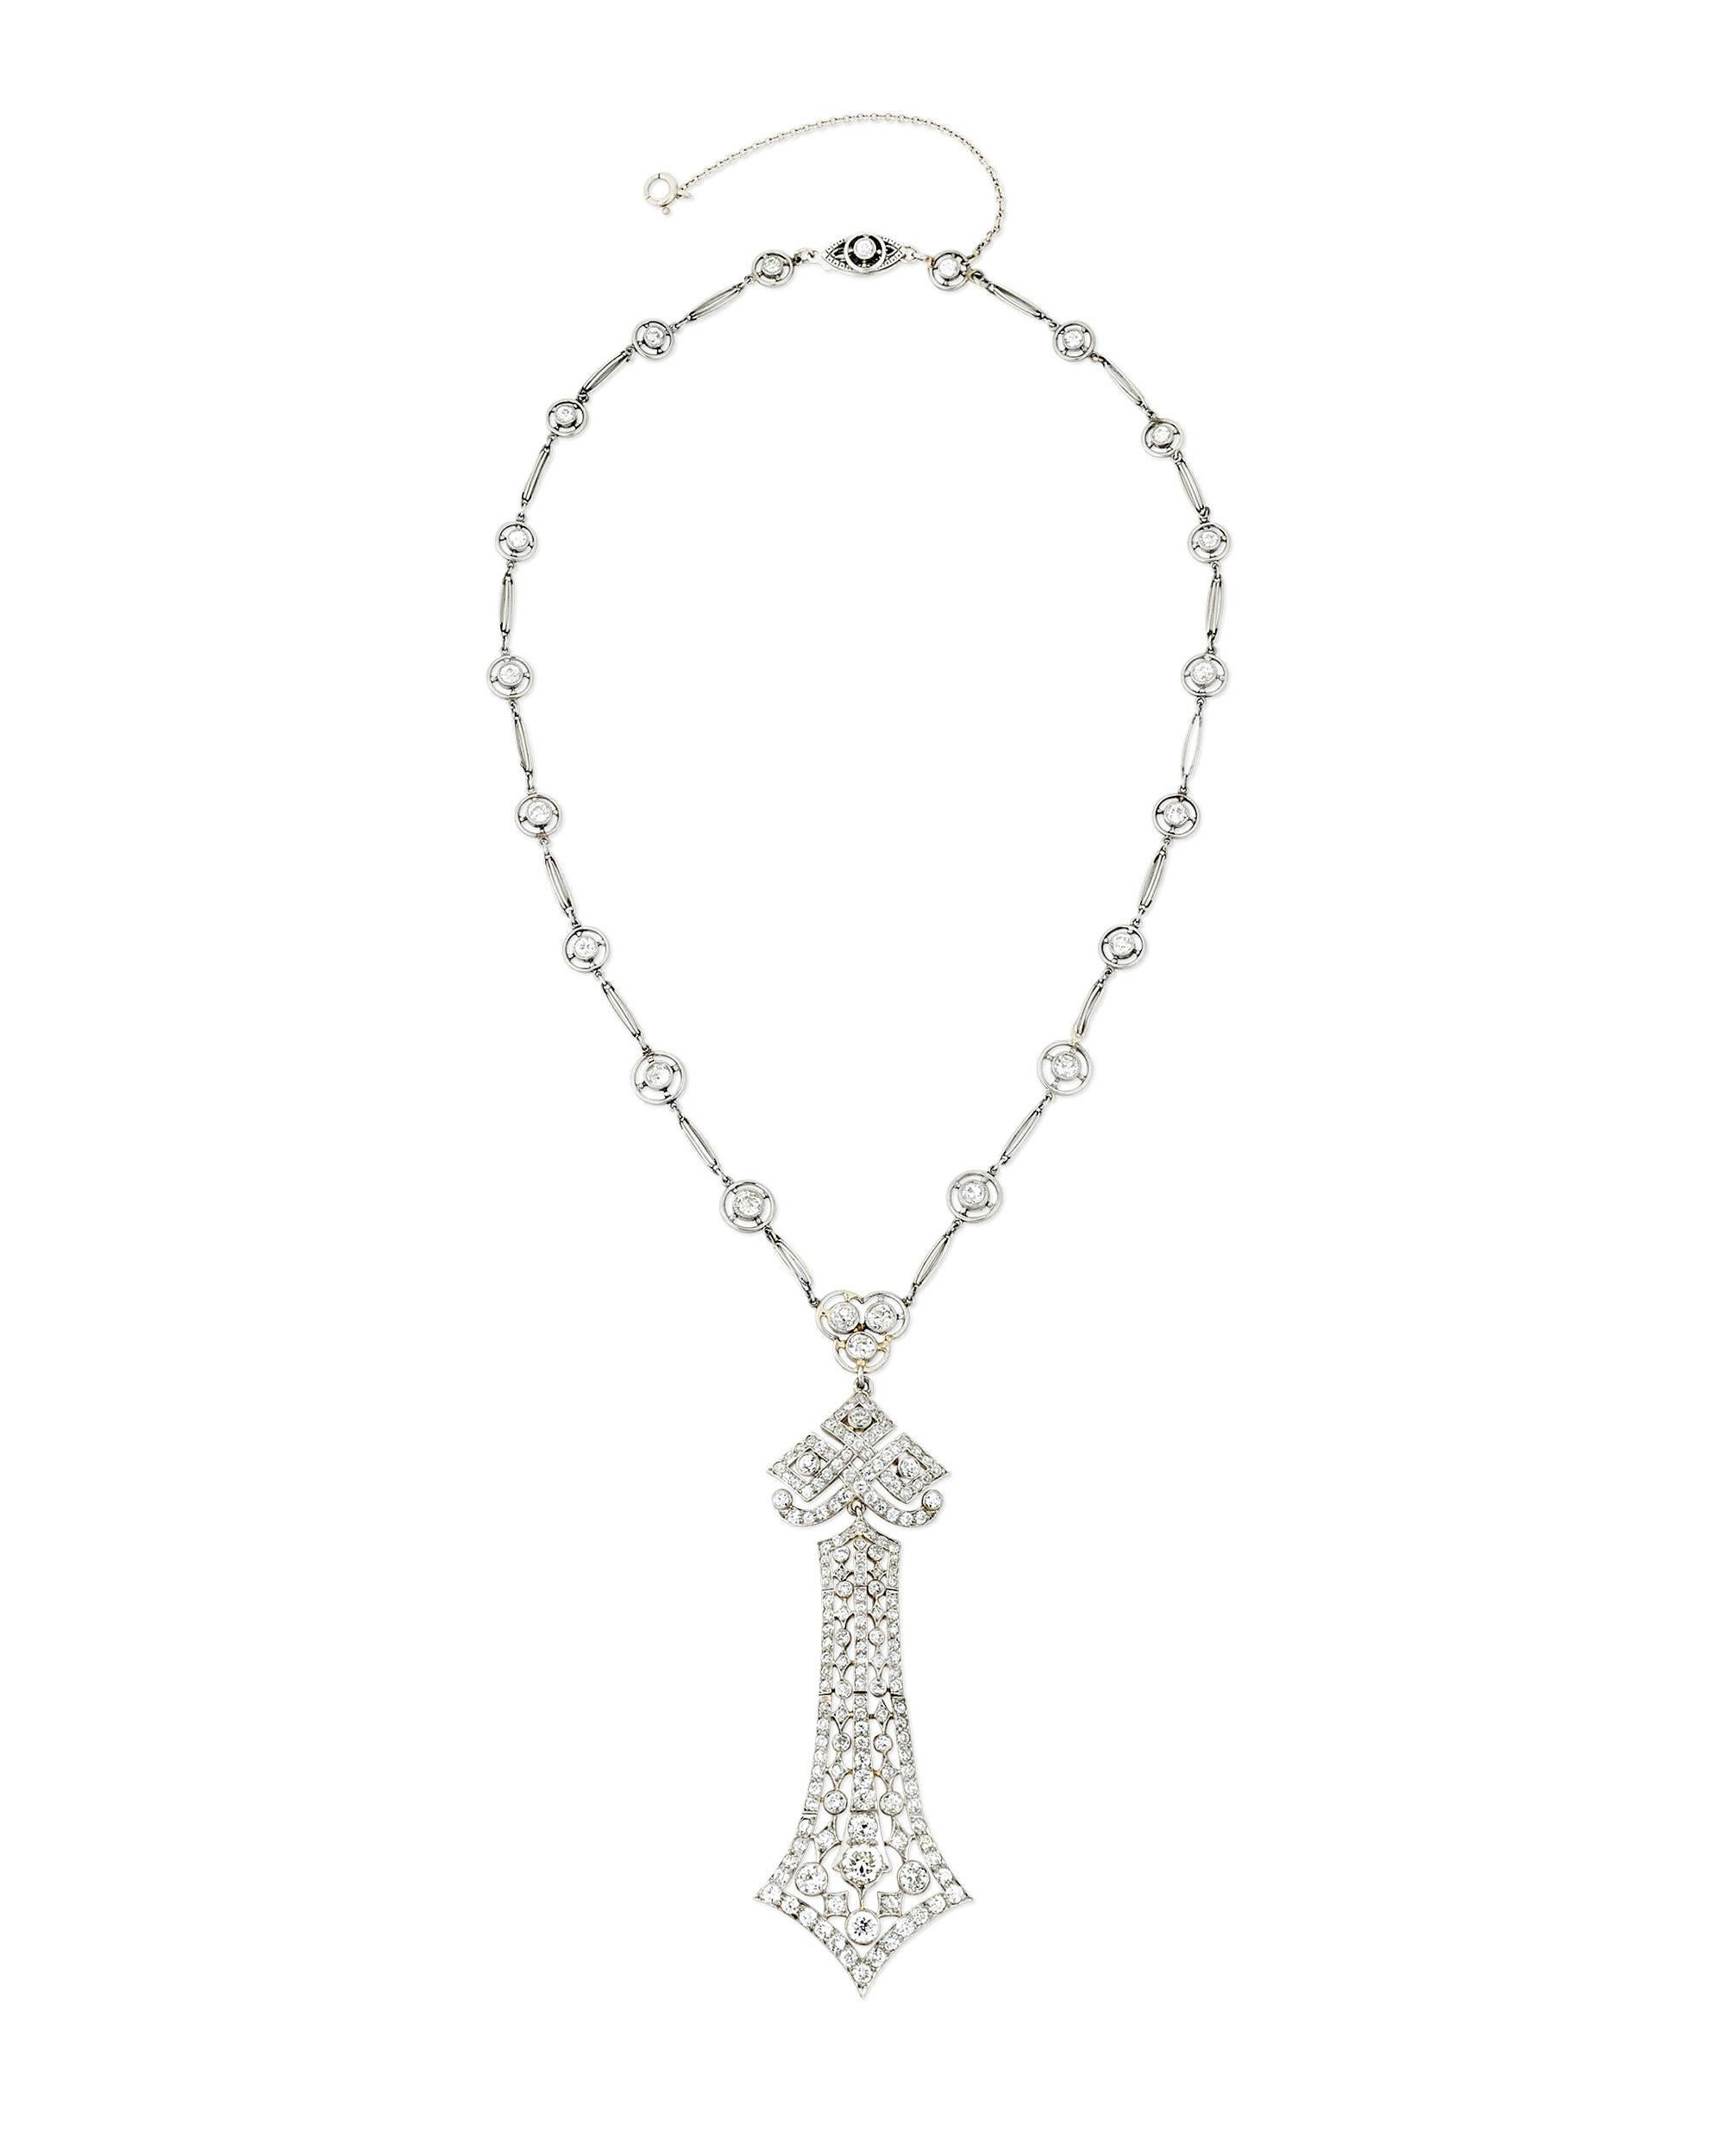 An exquisite design sets apart this Edwardian pendant necklace by the legendary Tiffany & Co. Approximately 4.00 total carats of diamonds adorn the necklace, which boasts a lace-like delicacy thanks to its intricately crafted platinum-over-gold